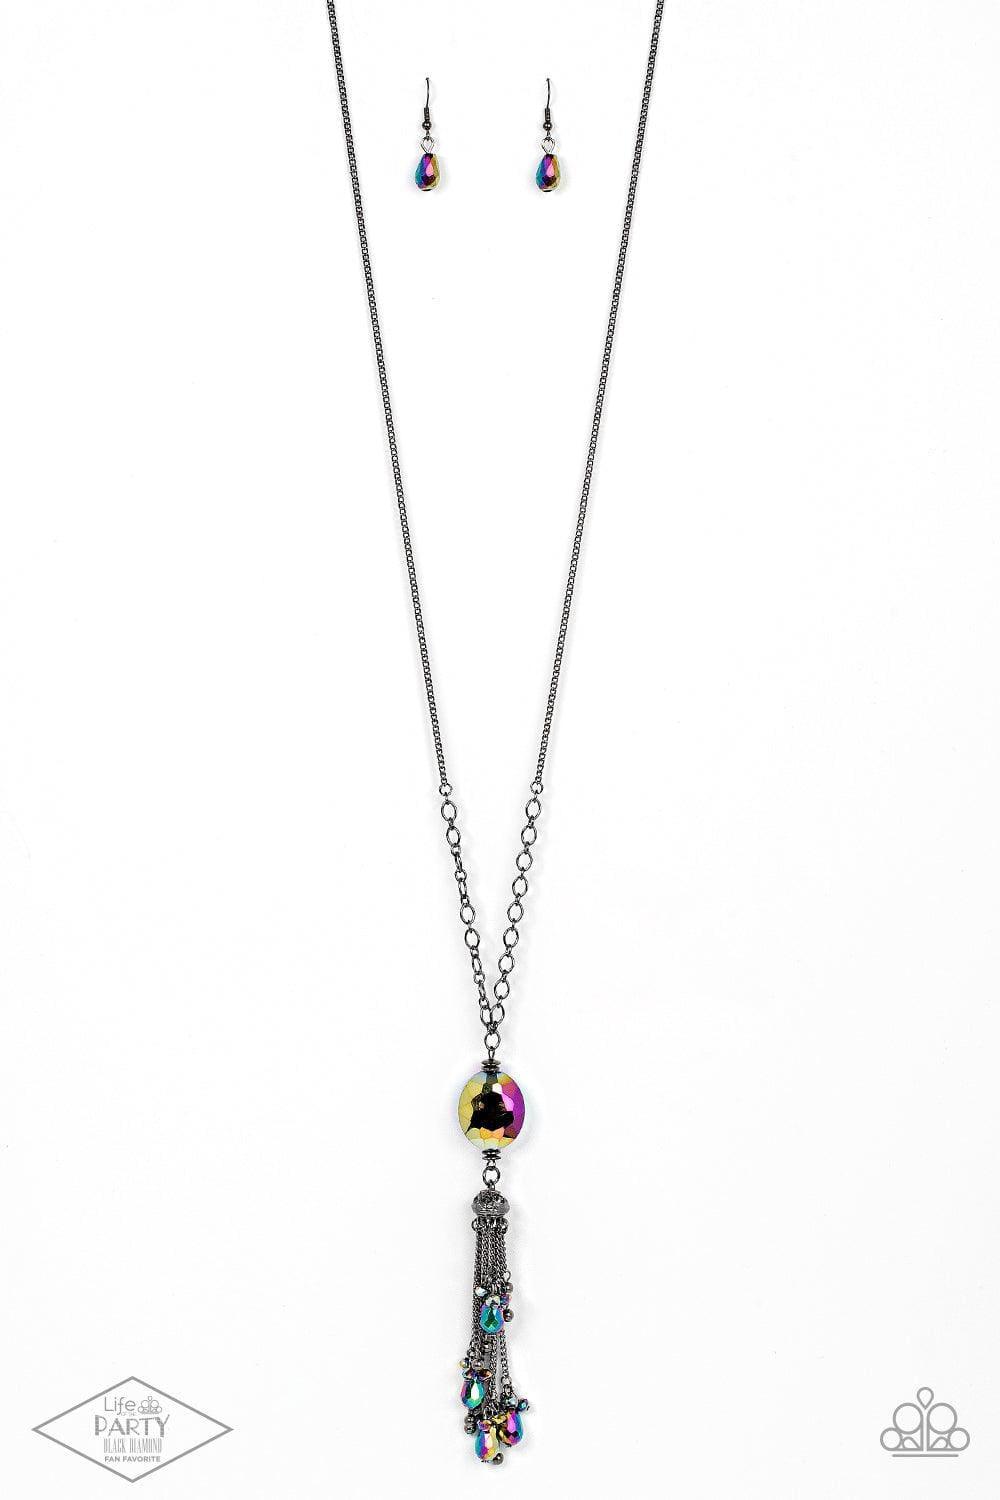 Paparazzi Accessories - Fringe Flavor - Multicolor Oil Spill Necklace - Bling by JessieK